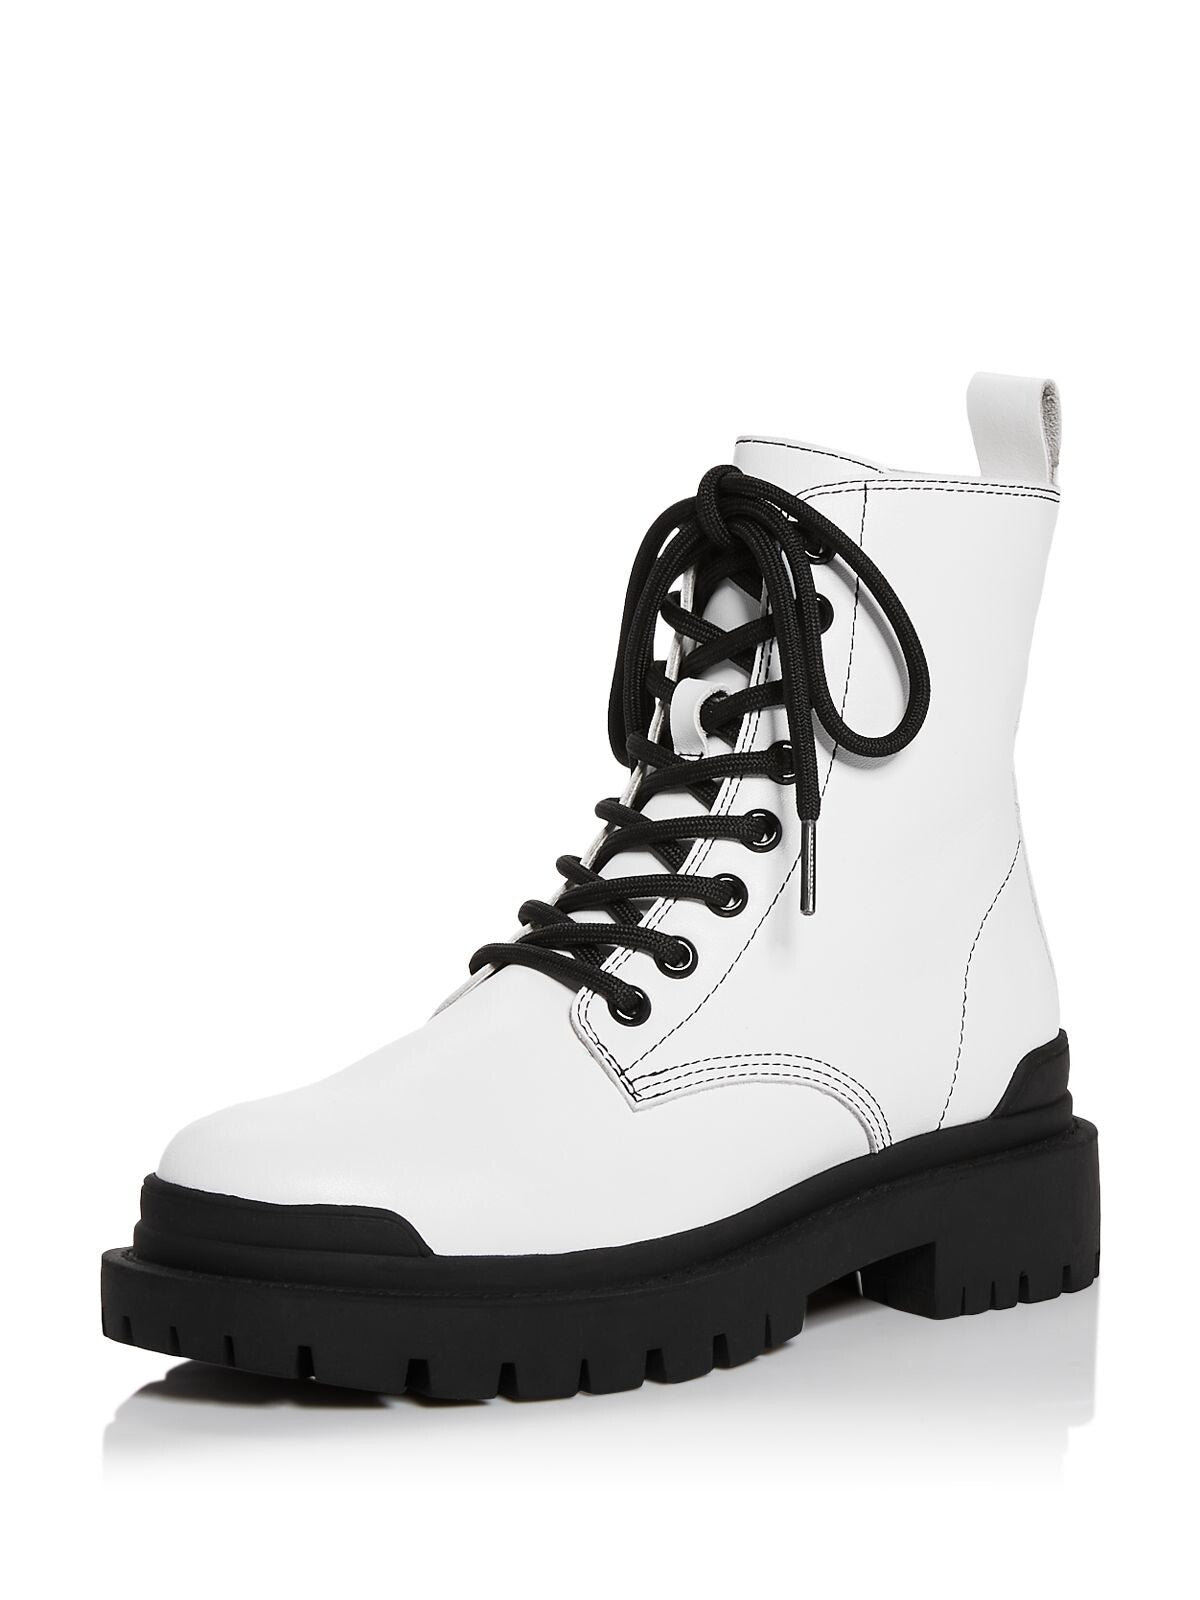 AQUA Womens White Pull Tab Lug Sole Lace Quinn Round Toe Block Heel Lace-Up Leather Combat Boots 6.5 M